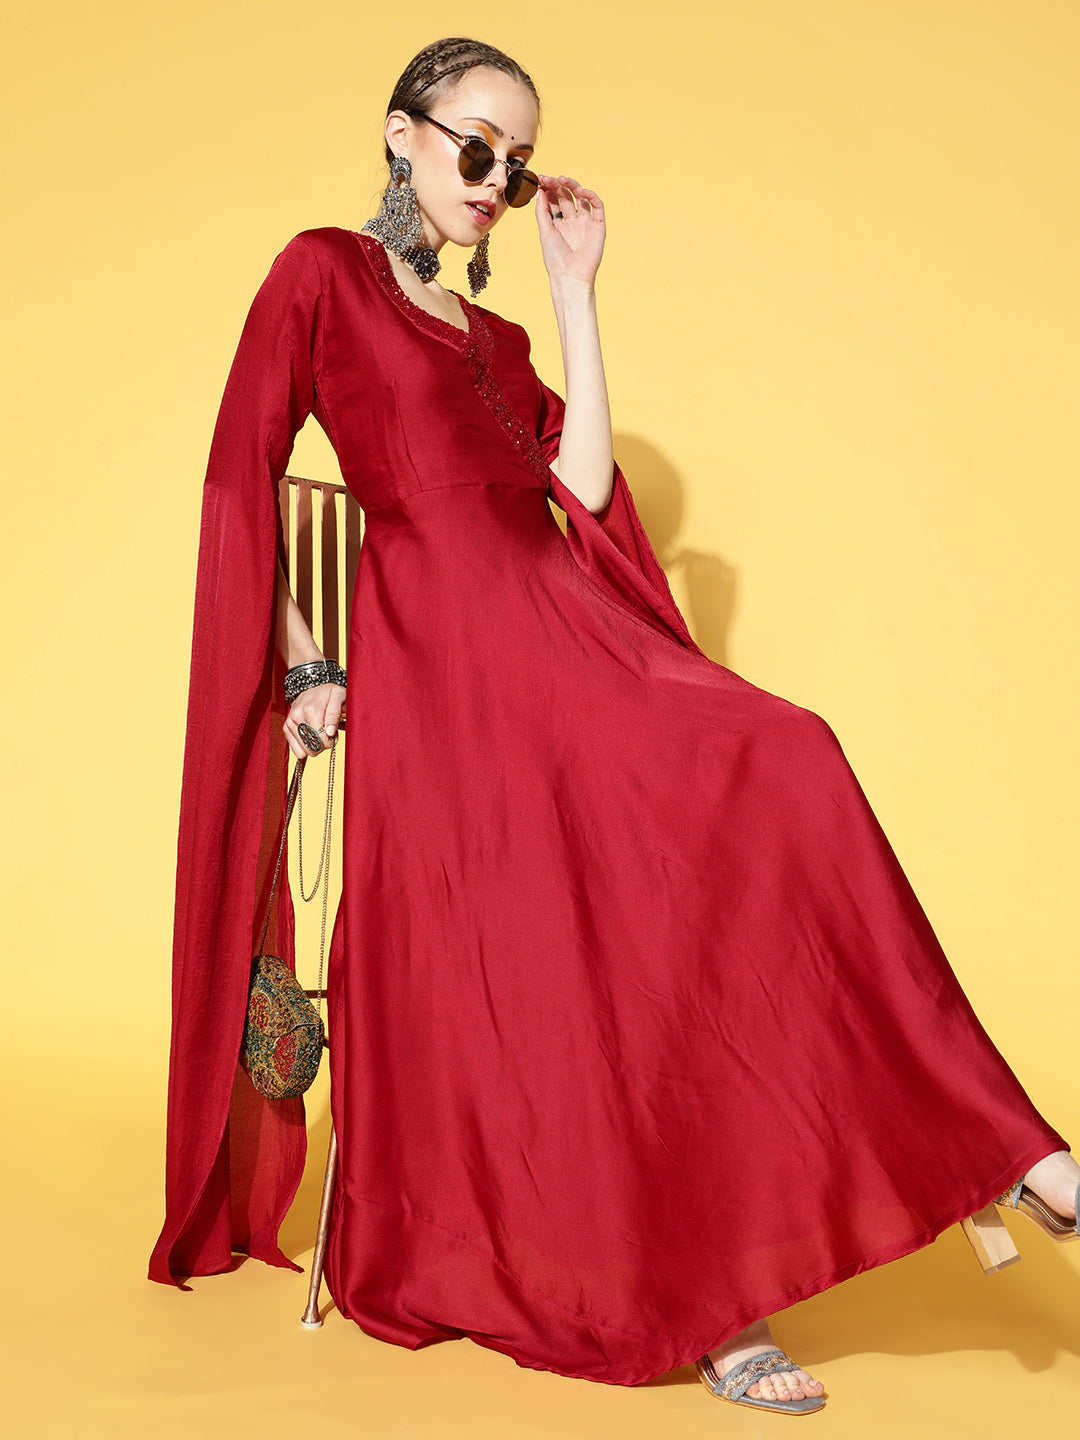 Maroon Gown With Flowy Sleeves